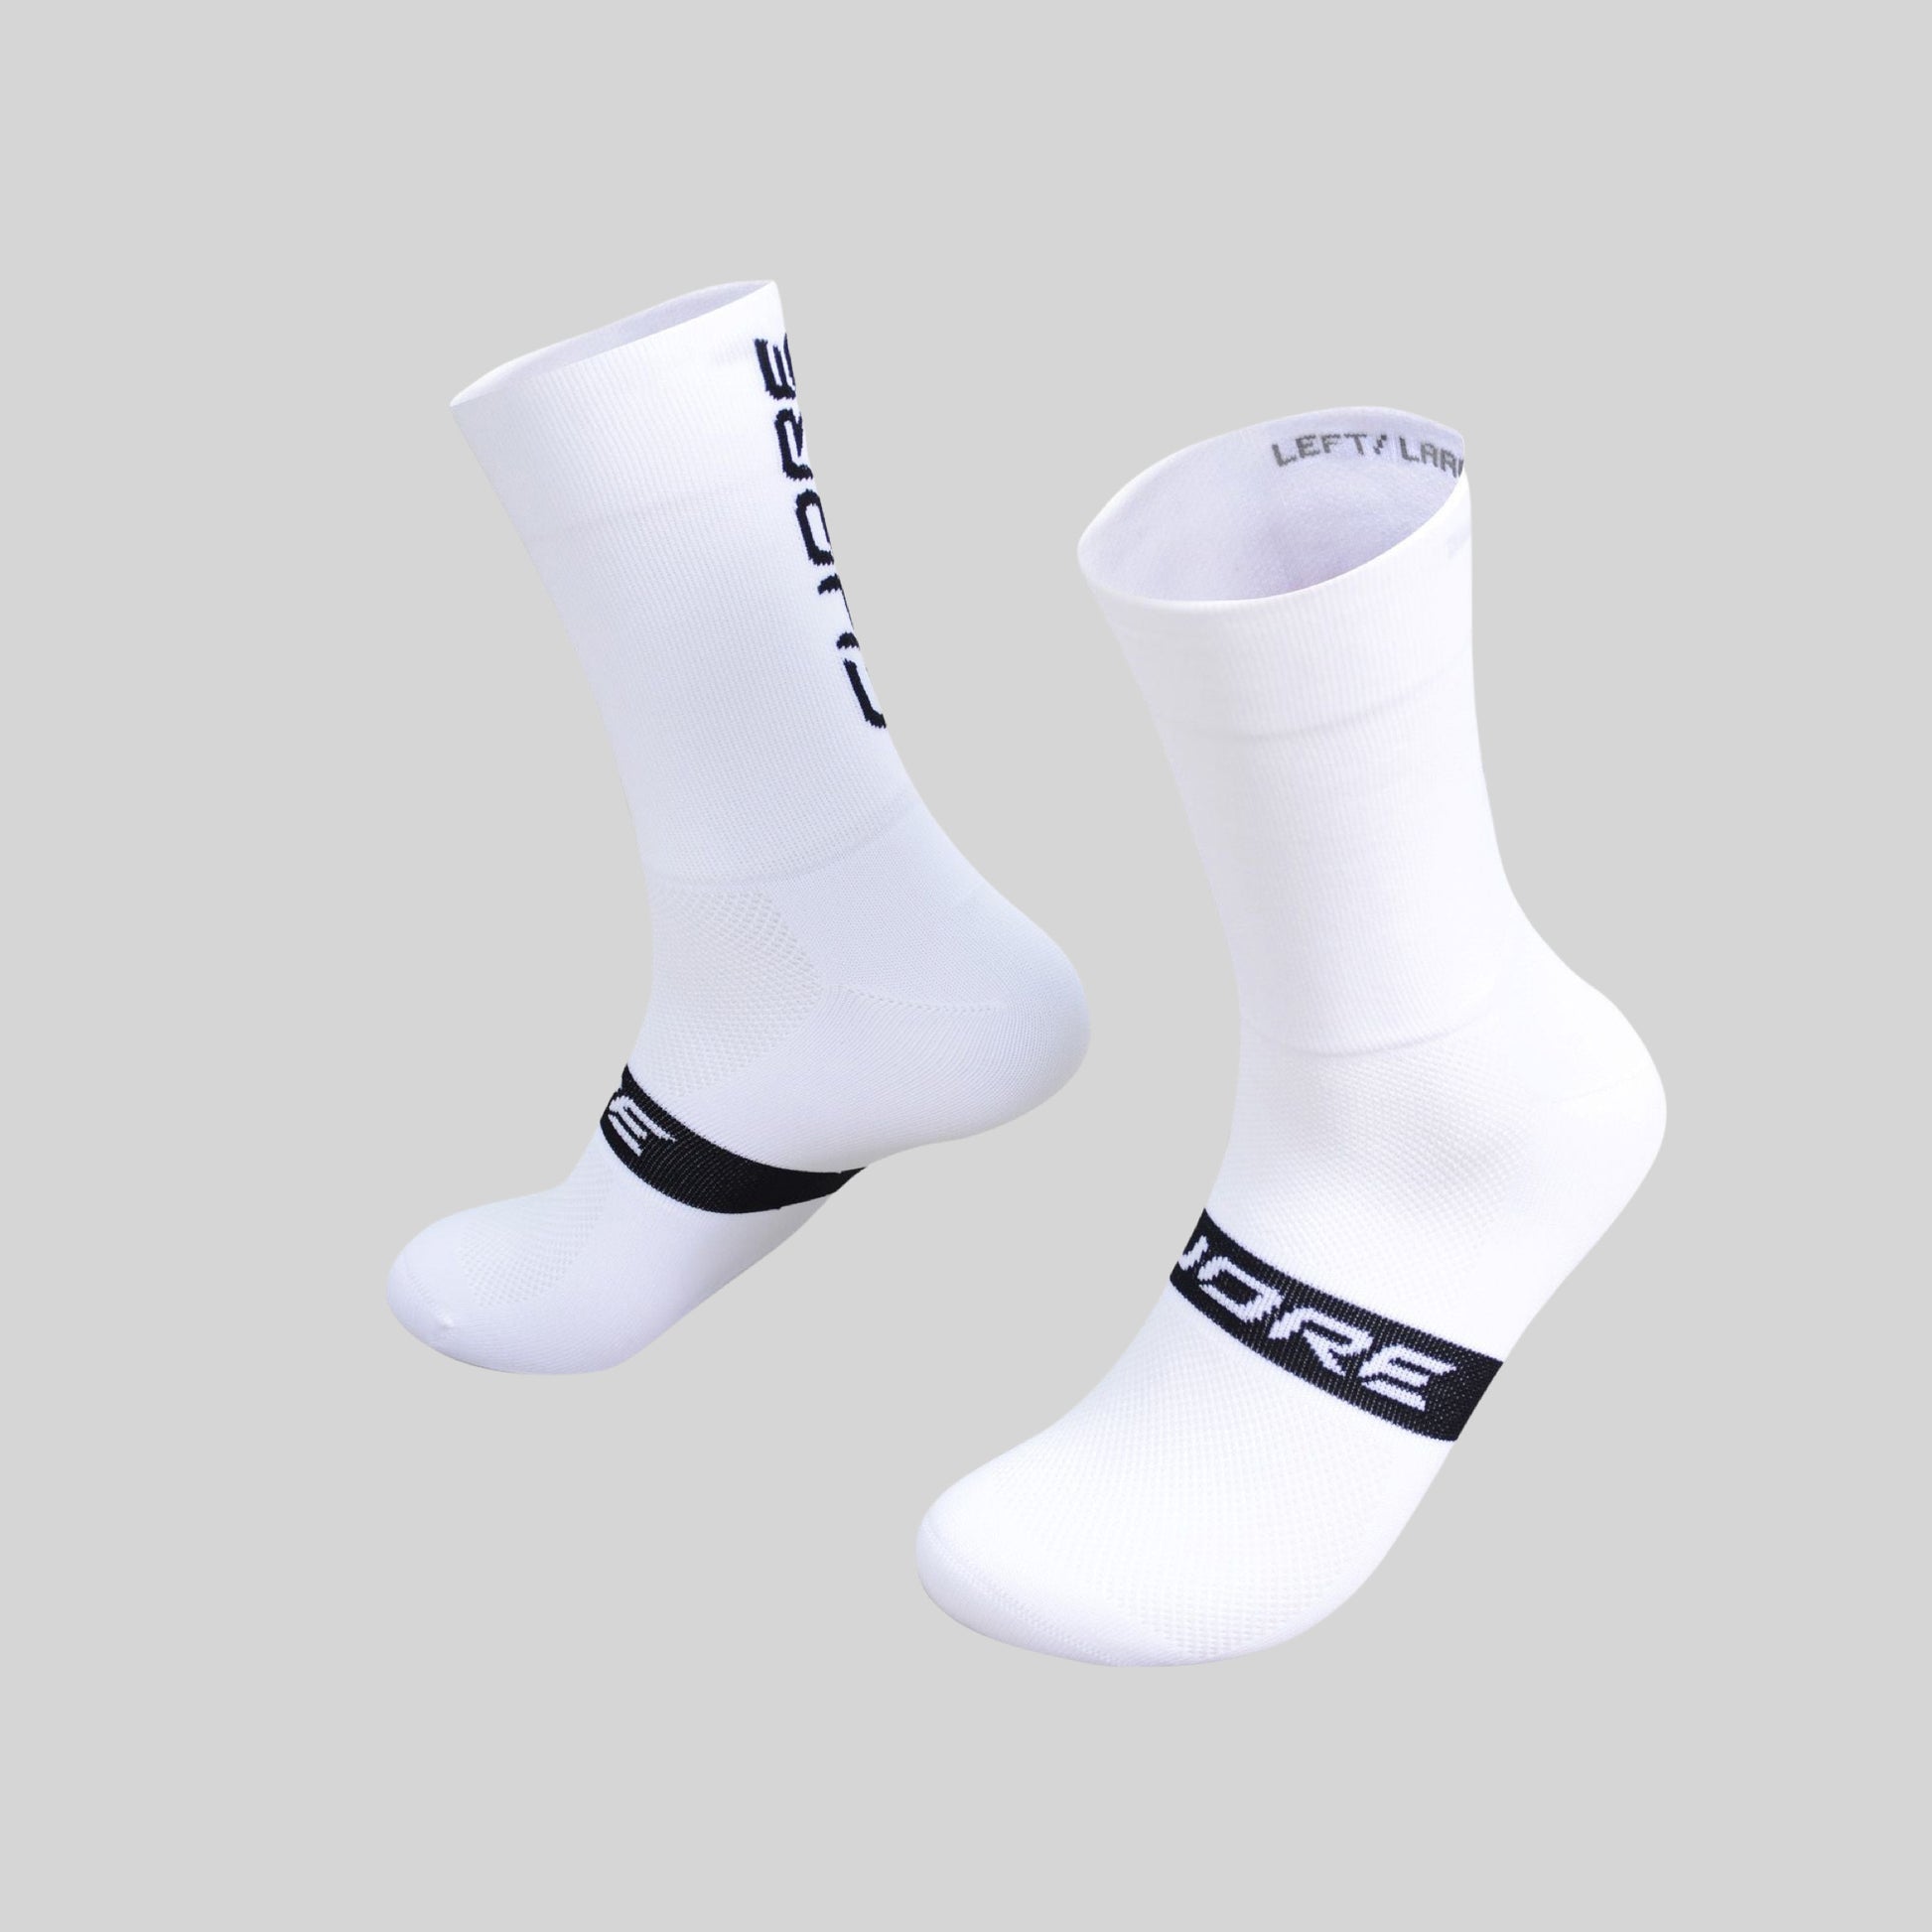 Classic Socks Long Unisex White Ascender Cycling Club x Cuore of Switzerland